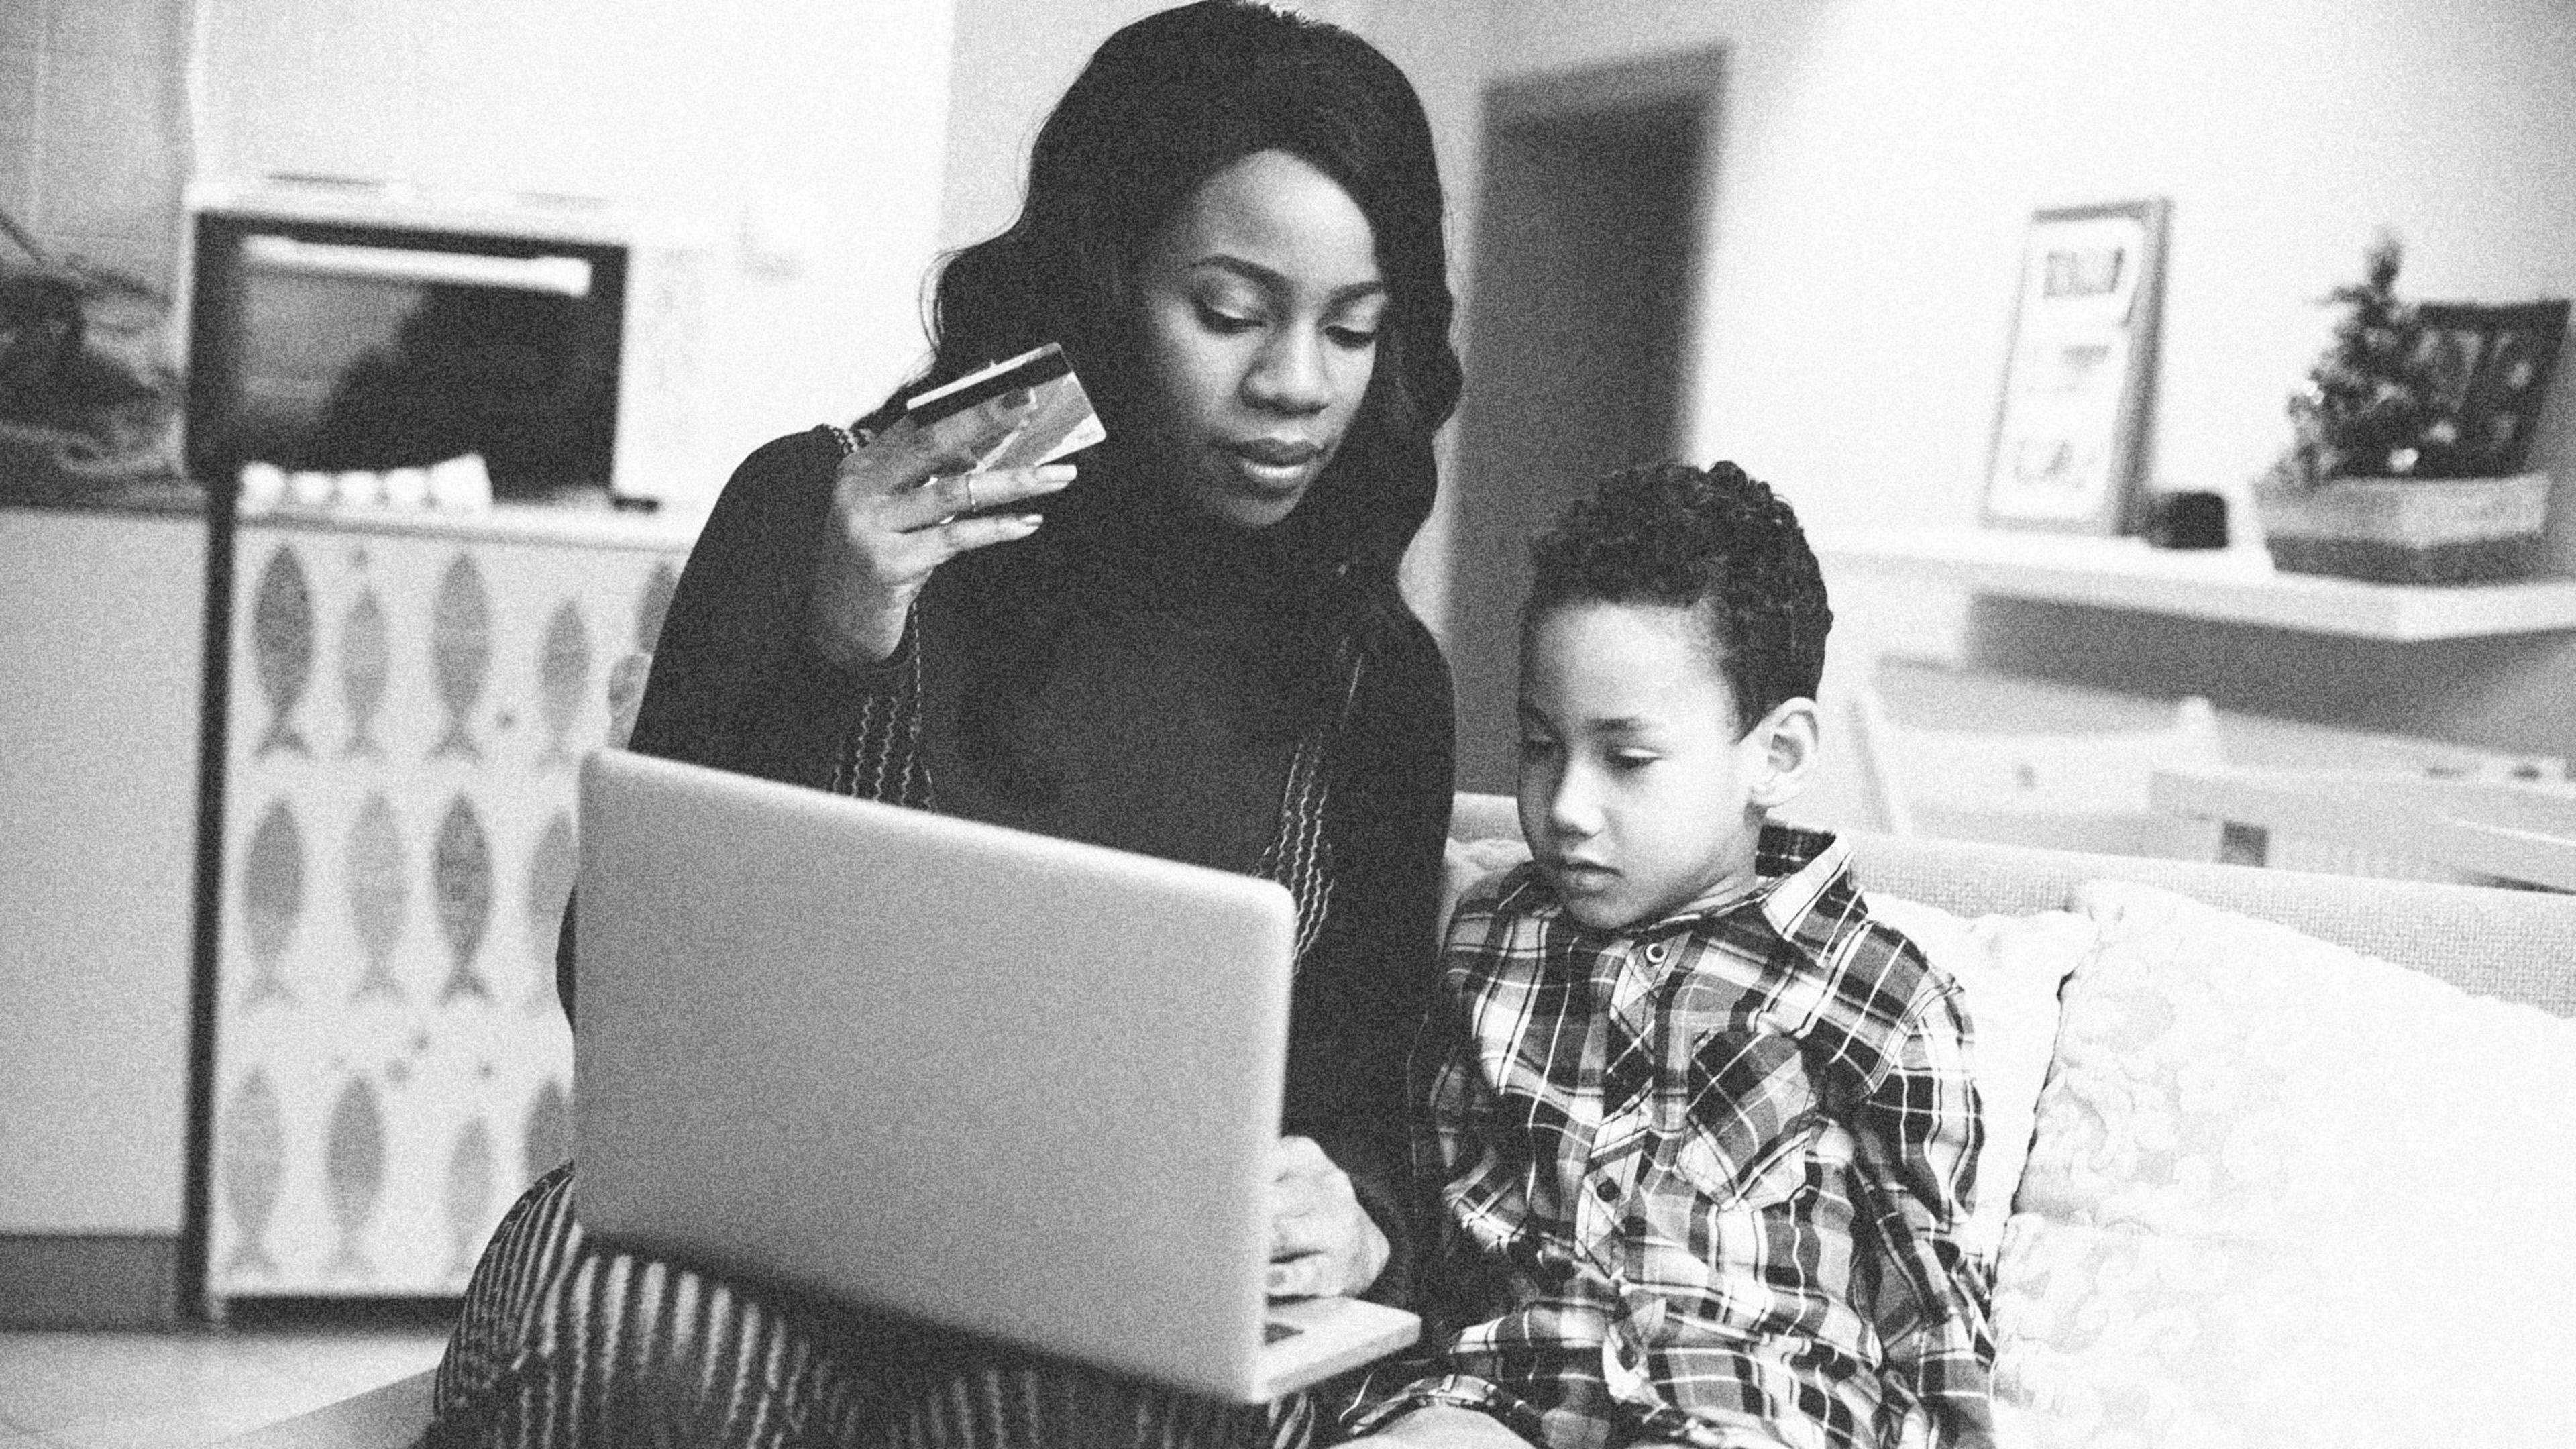 The economic insecurity of Black breadwinner moms affects us all